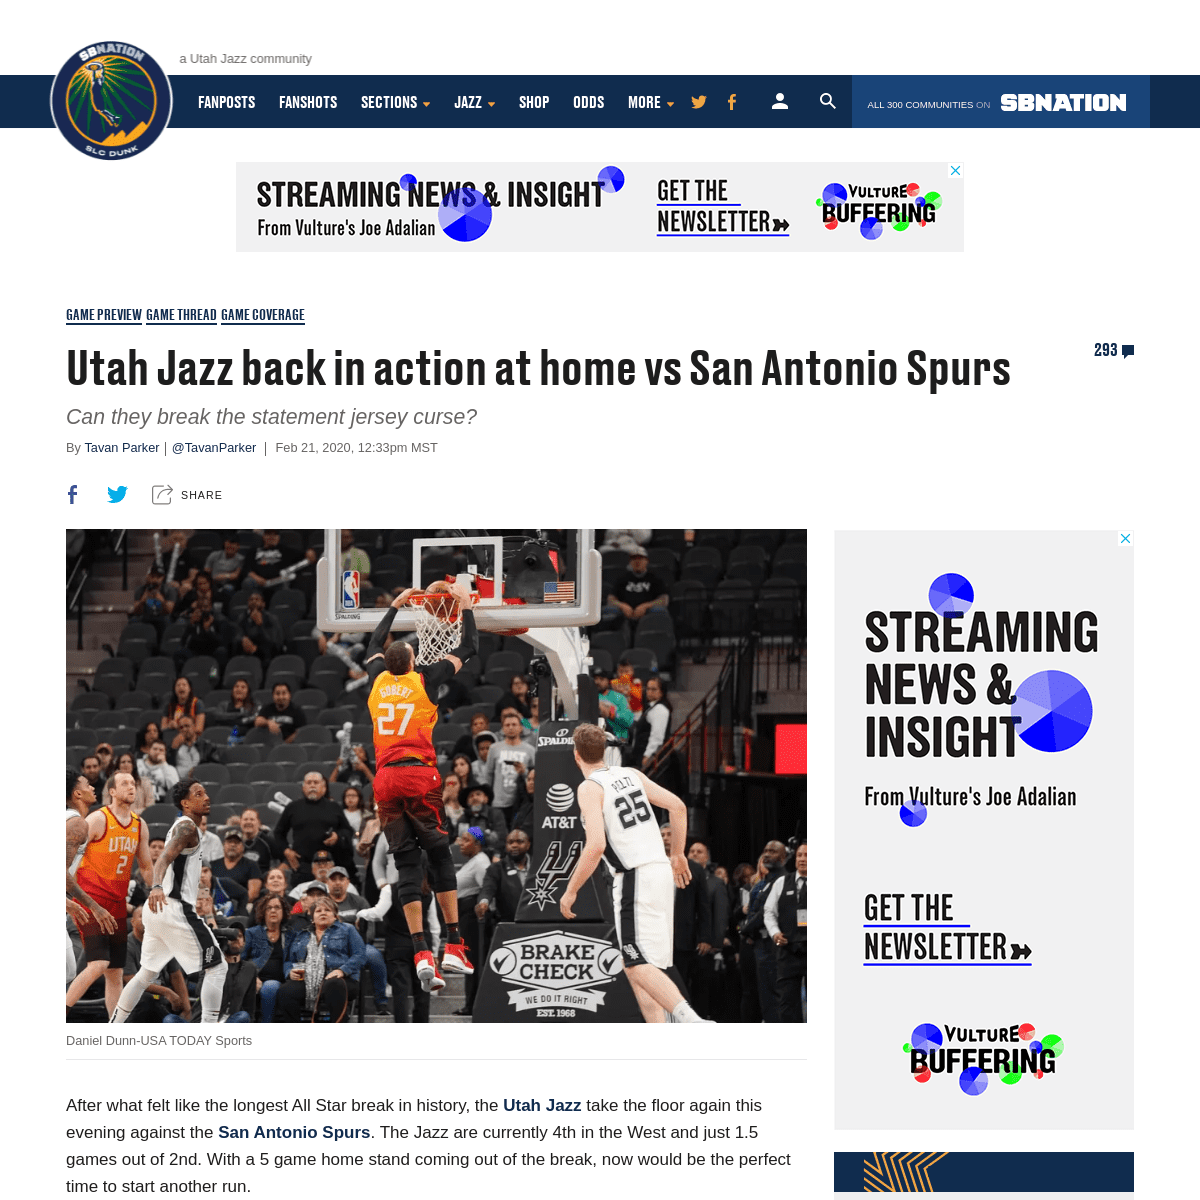 A complete backup of www.slcdunk.com/2020/2/21/21147522/utah-jazz-san-antonio-spurs-february-21-game-preview-and-thread